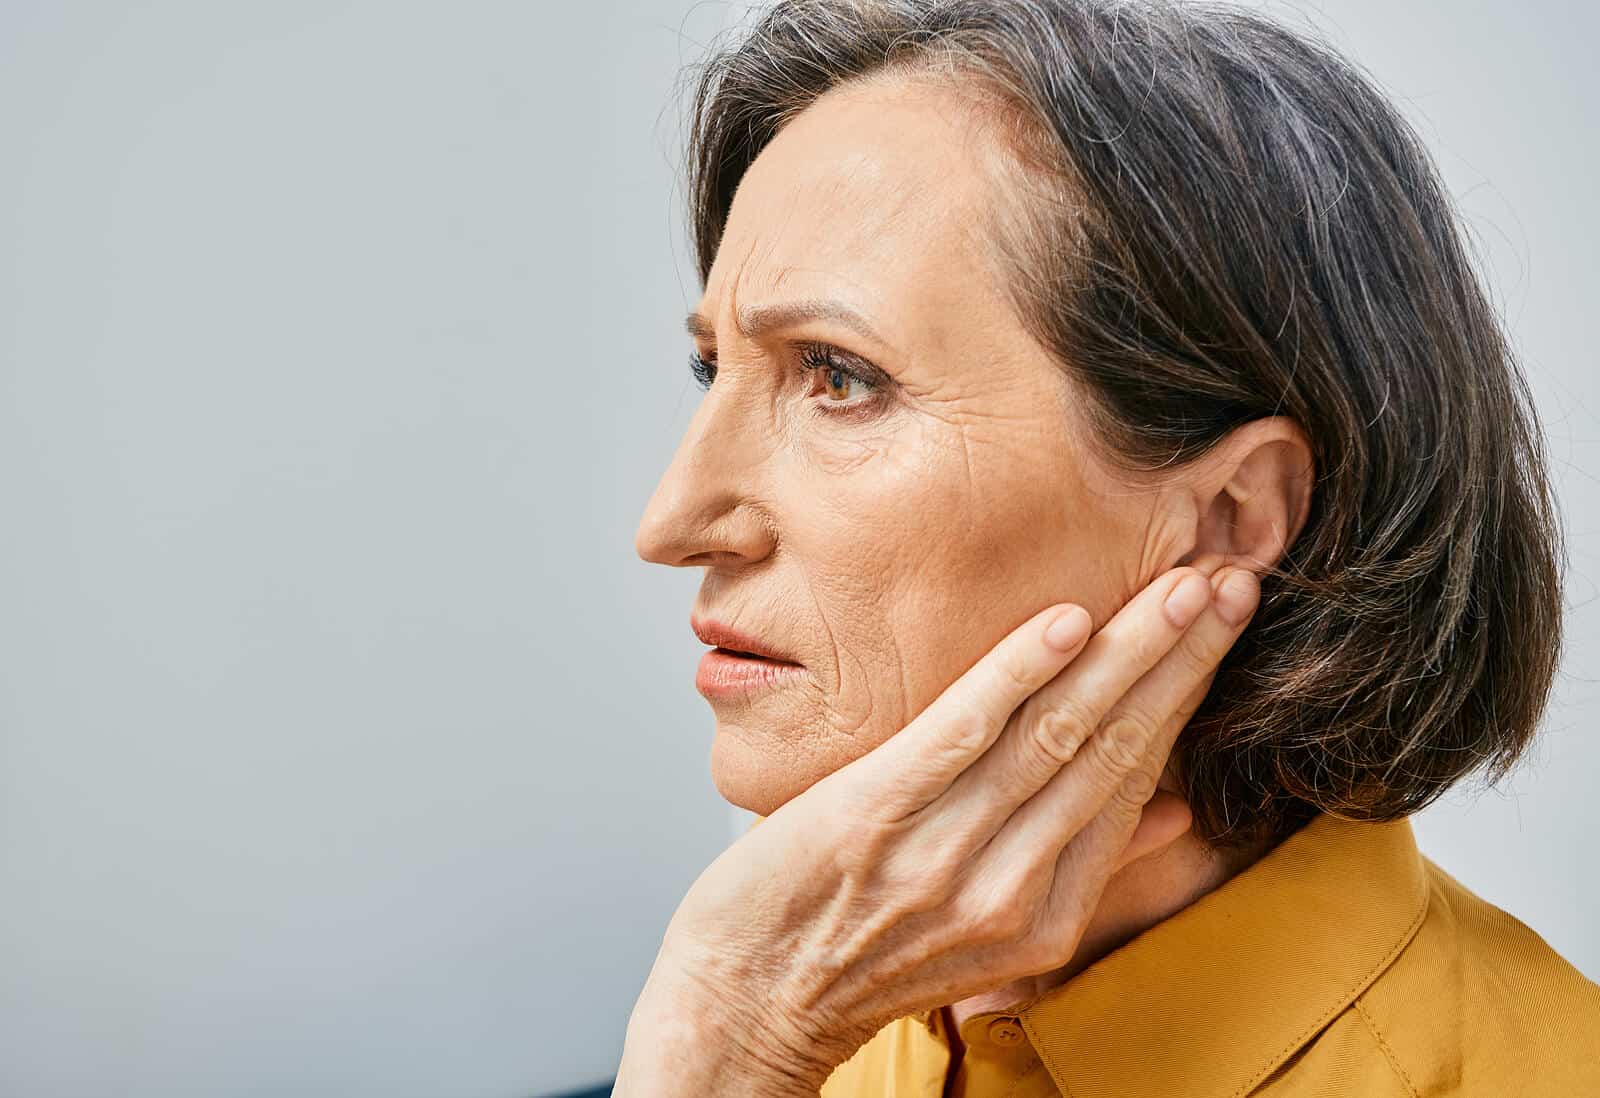 Featured image for “Identifying the Signs of Hearing Loss”